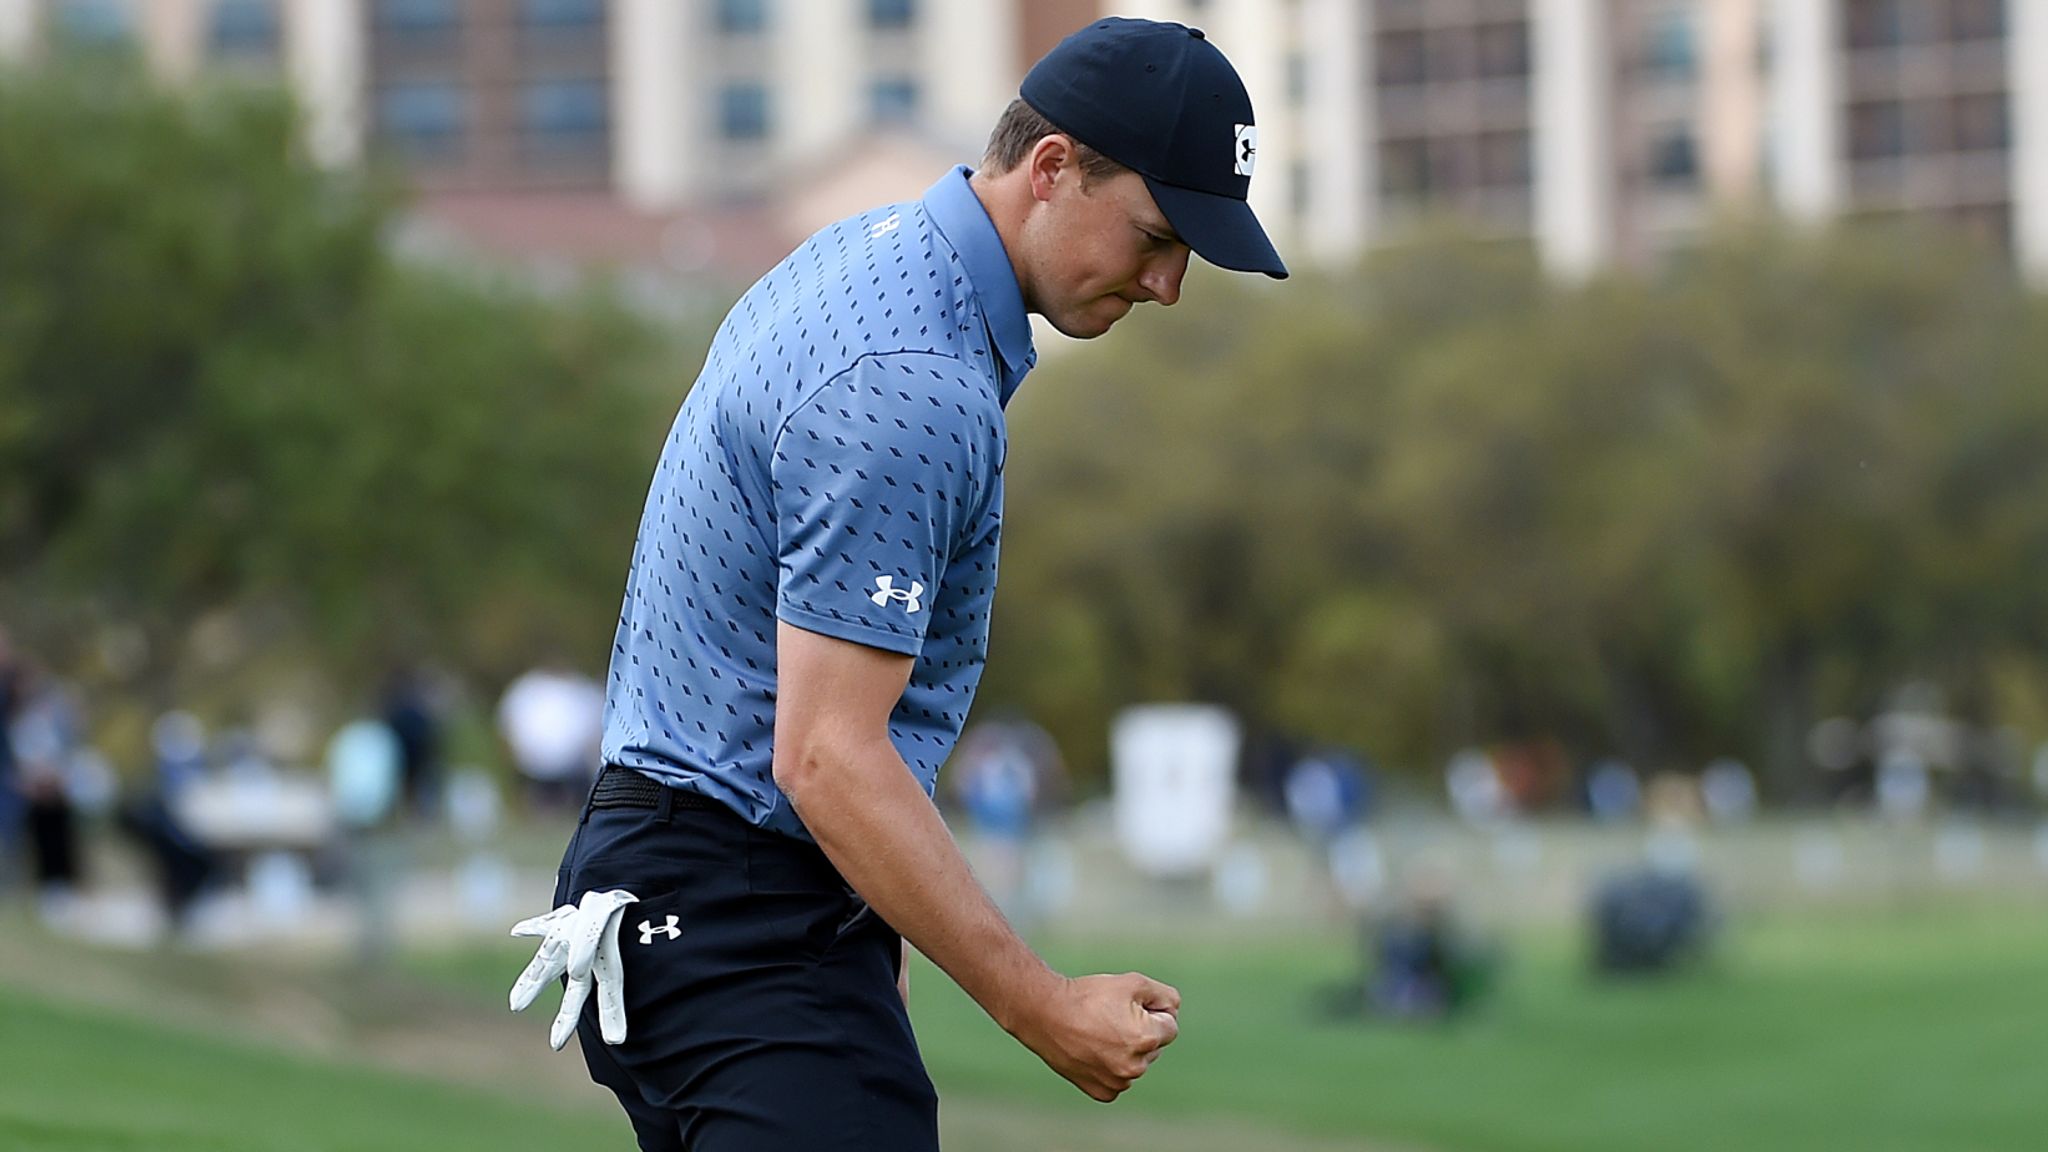 Jordan Spieth wins Valero Texas Open to end victory drought ahead of The Masters Golf News Sky Sports